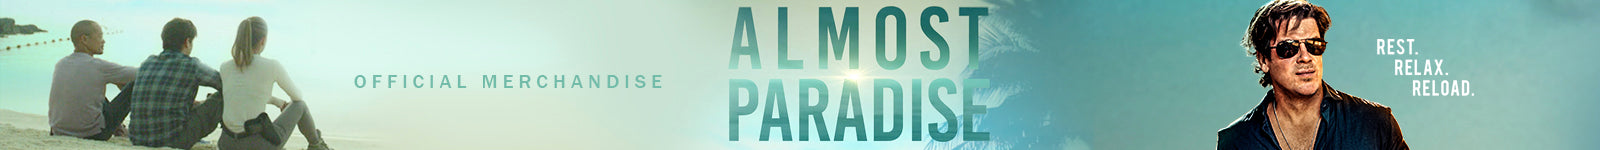 Almost Paradise banner